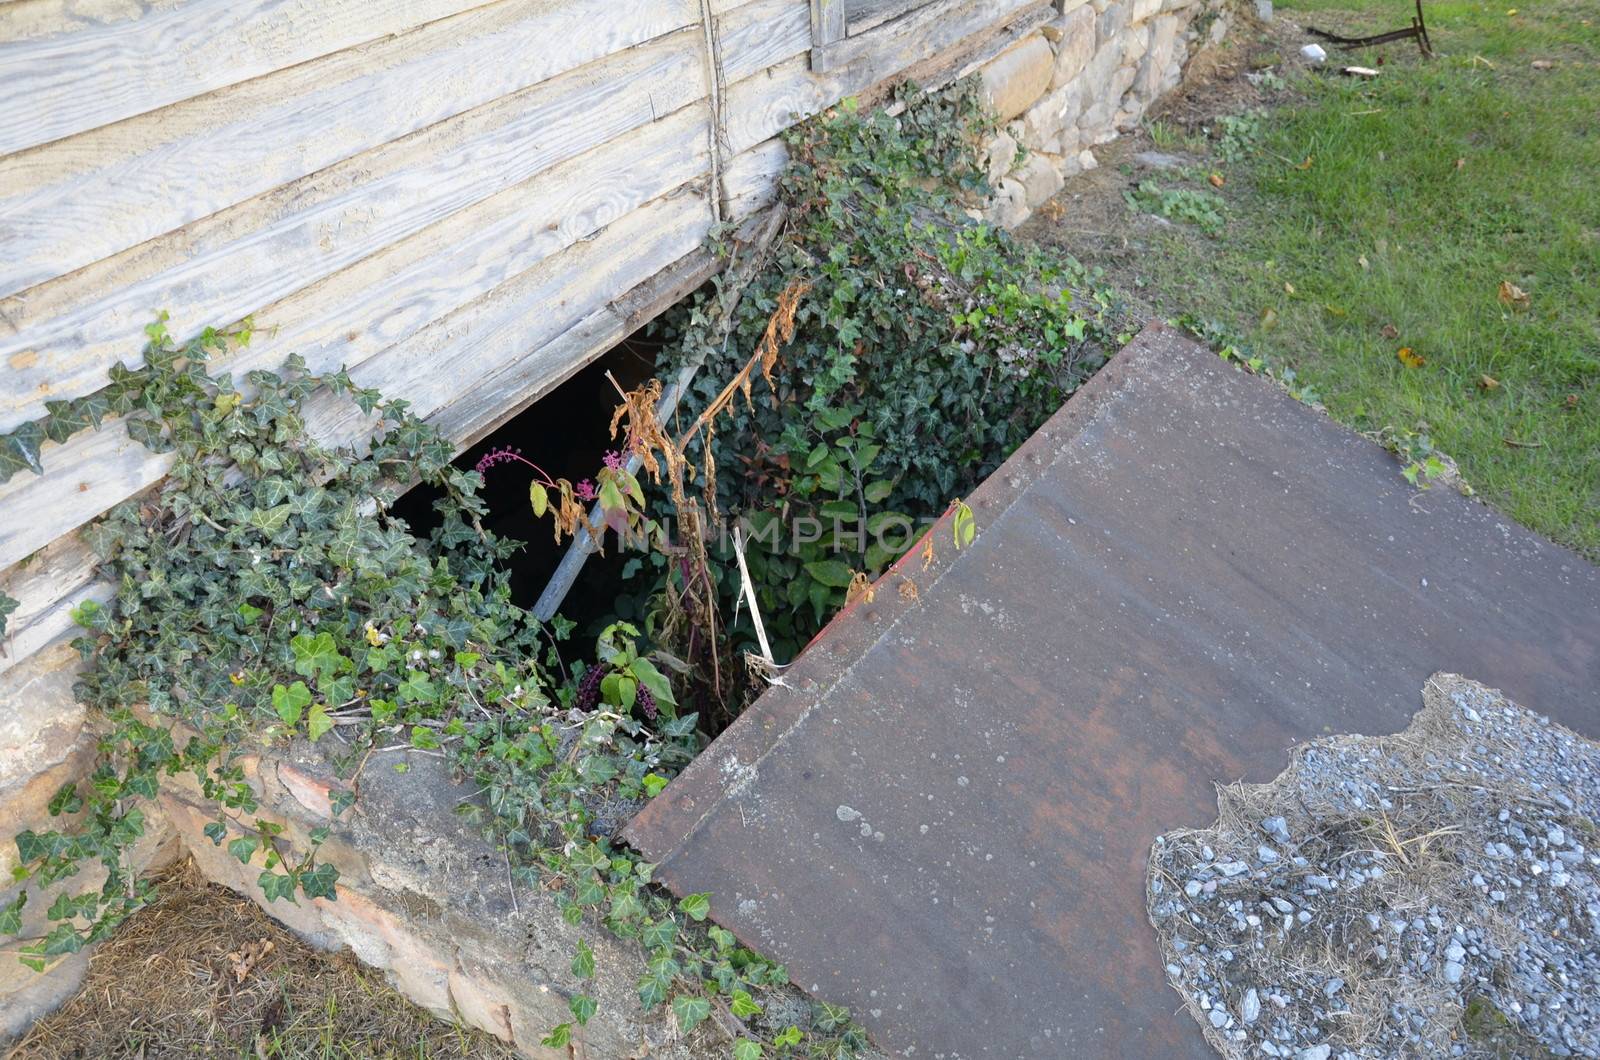 metal covering on dilapidated basement or cellar entrance with plants